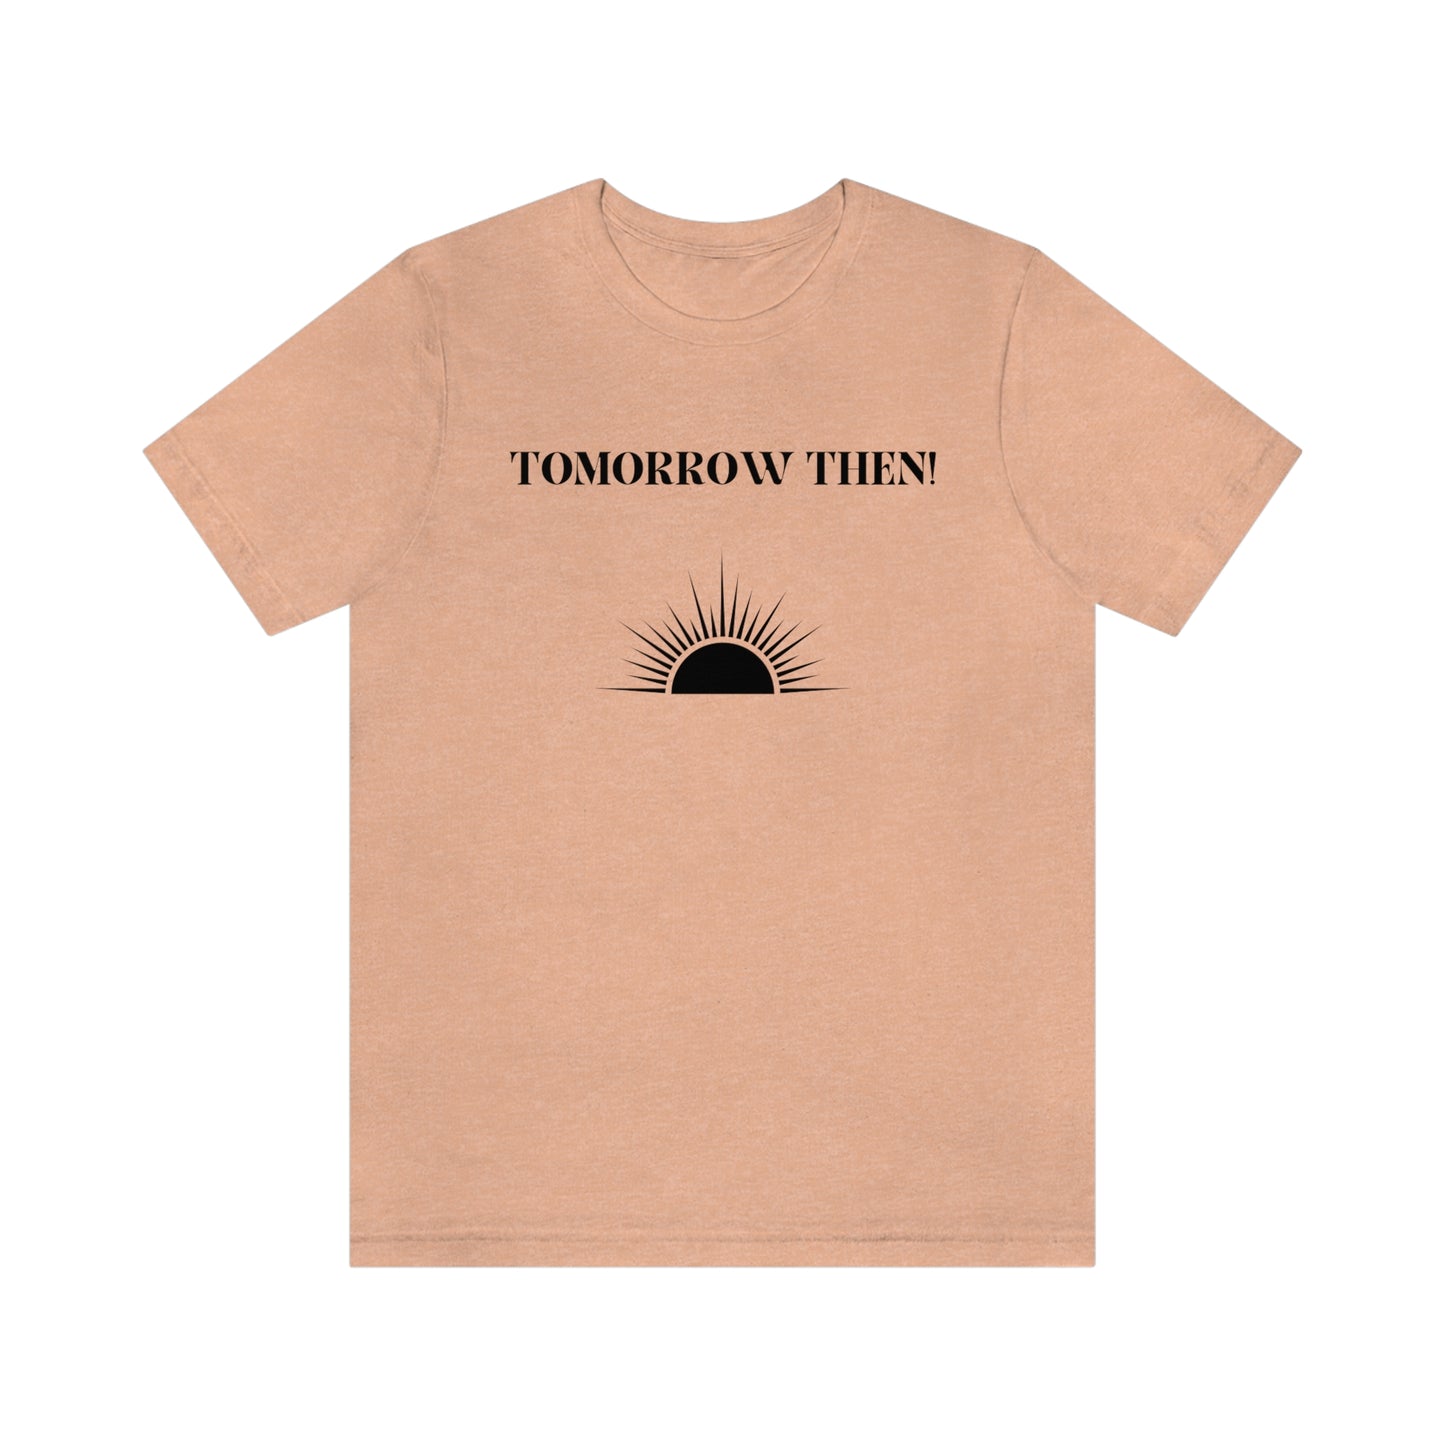 Tomorrow then t shirt, t shirt with inspirational words t shirts to encourage loved ones, tshirt gift for friends ,hopeful affirmations